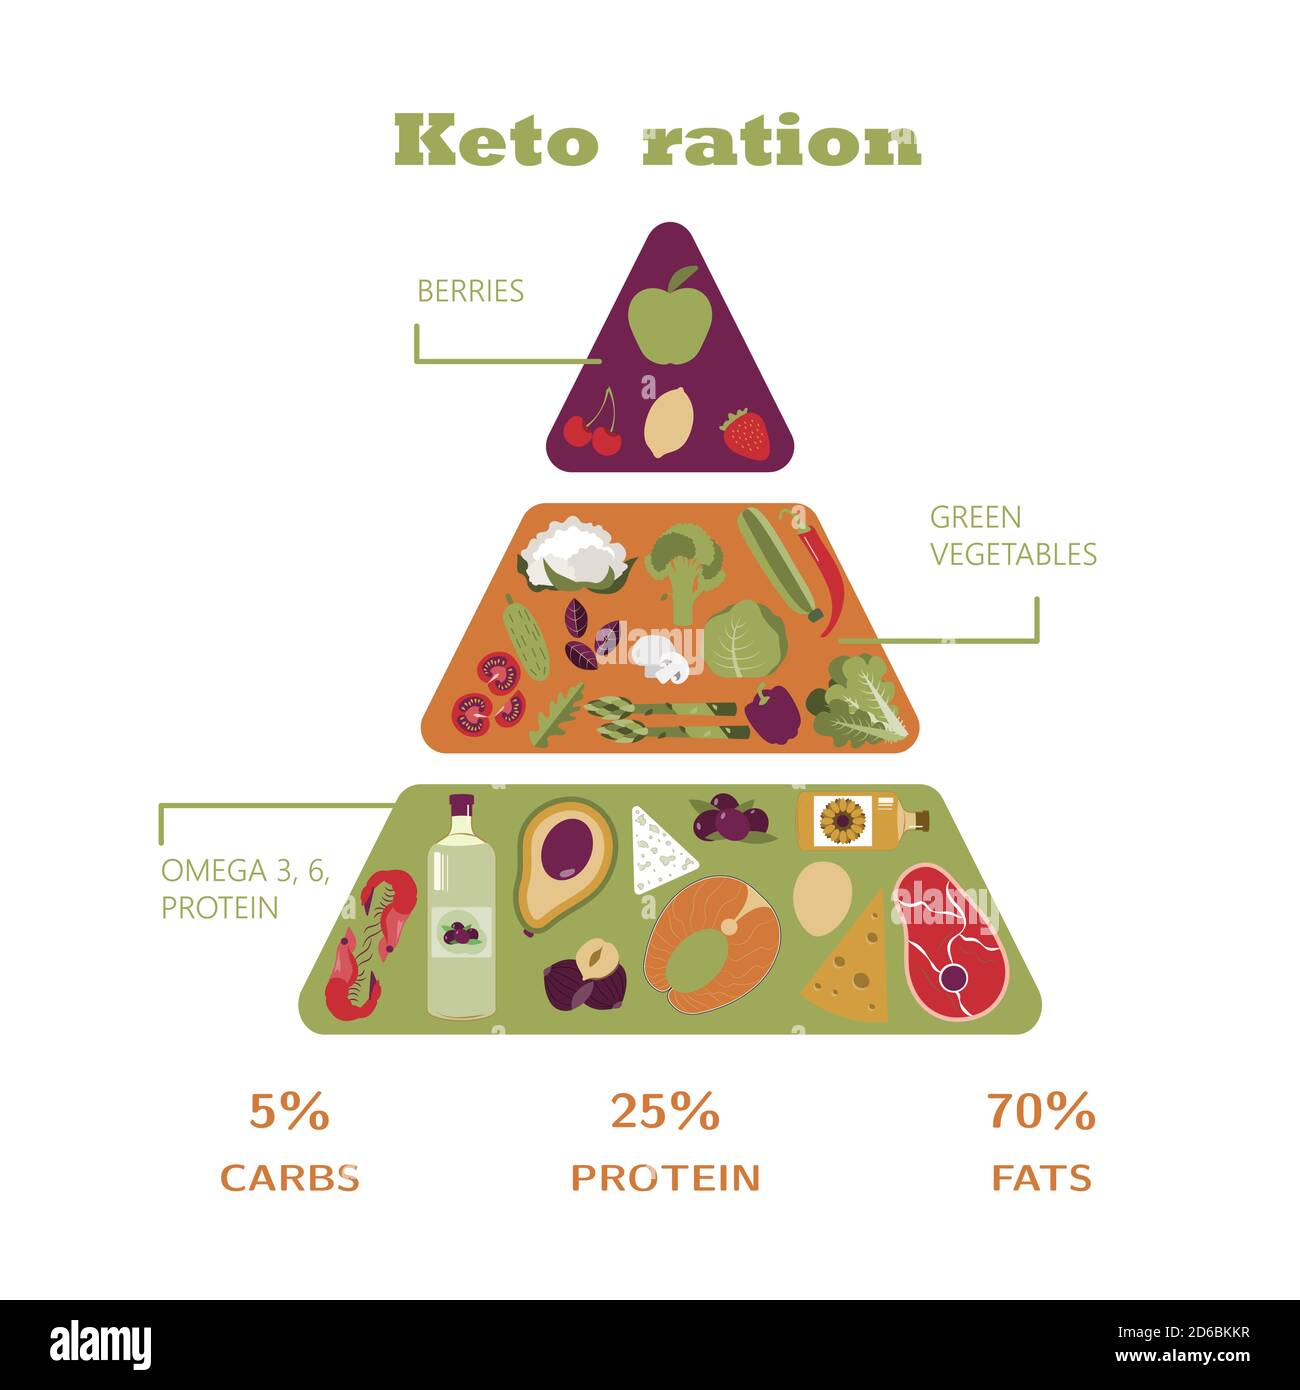 The food pyramid - the secret to eating healthy and losing weight